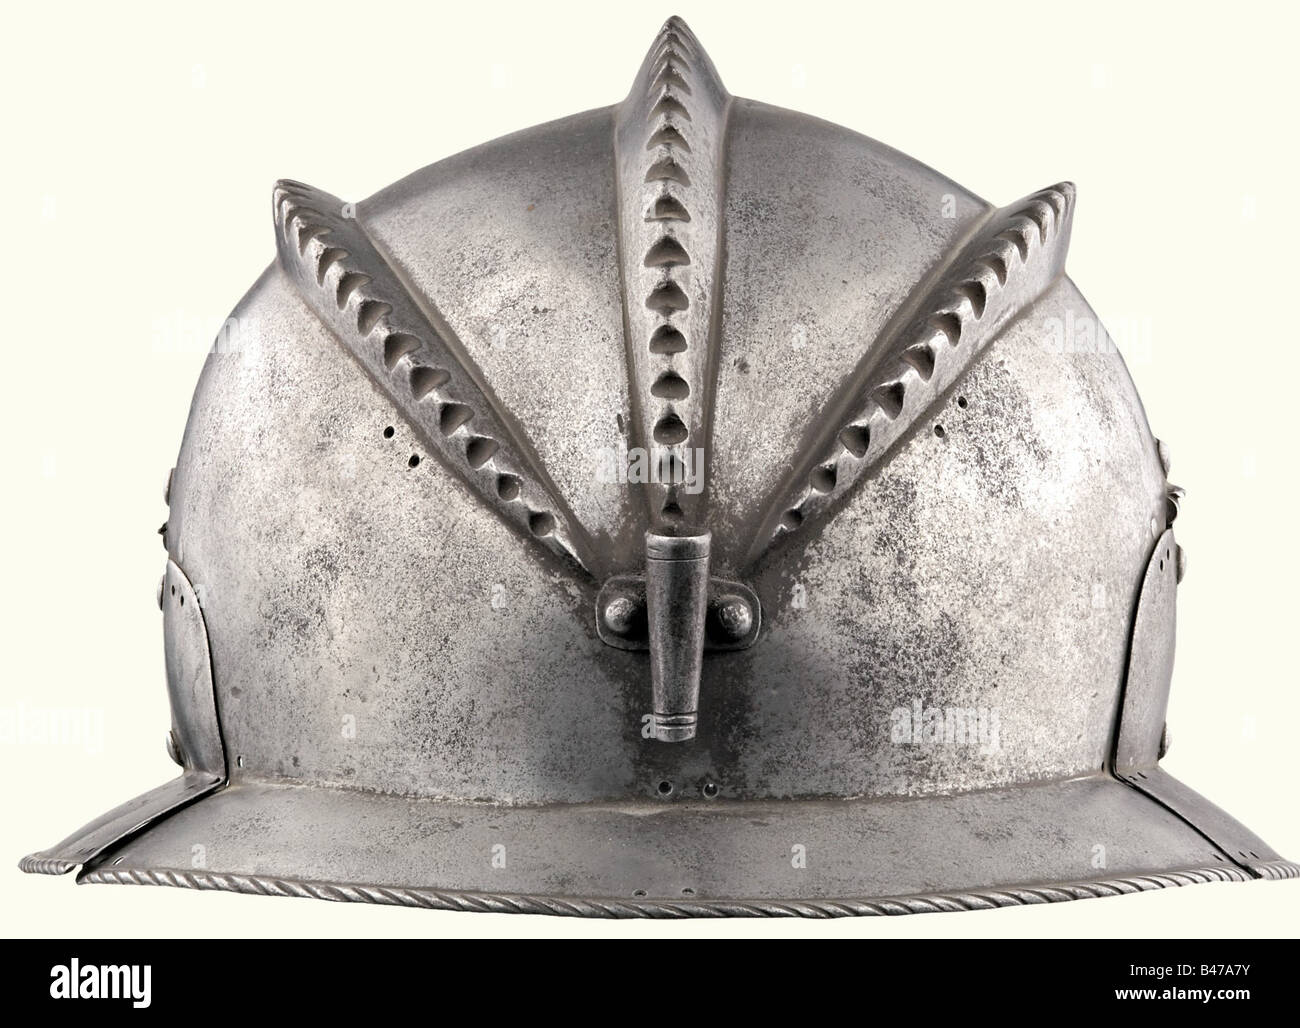 A burgonet with three combs, Augsburg, circa 1540/50 Skull forged in one piece with three low, serrated combs. There is a plume socket riveted at the nape and hinged cheek pieces on the sides. A short, slightly angled brim with a turned under corded rim. Numerous double holes for fastening the fabric helmet covering. The Augsburg acceptance mark (pine cone) is stamped on the front of the brim next to the arsenal mark of the Vienna Armory. Height 17.5 cm. Light burgonet that was originally provided with a velvet cloth covering. Kaiser Karl V wears a similar helm, Stock Photo